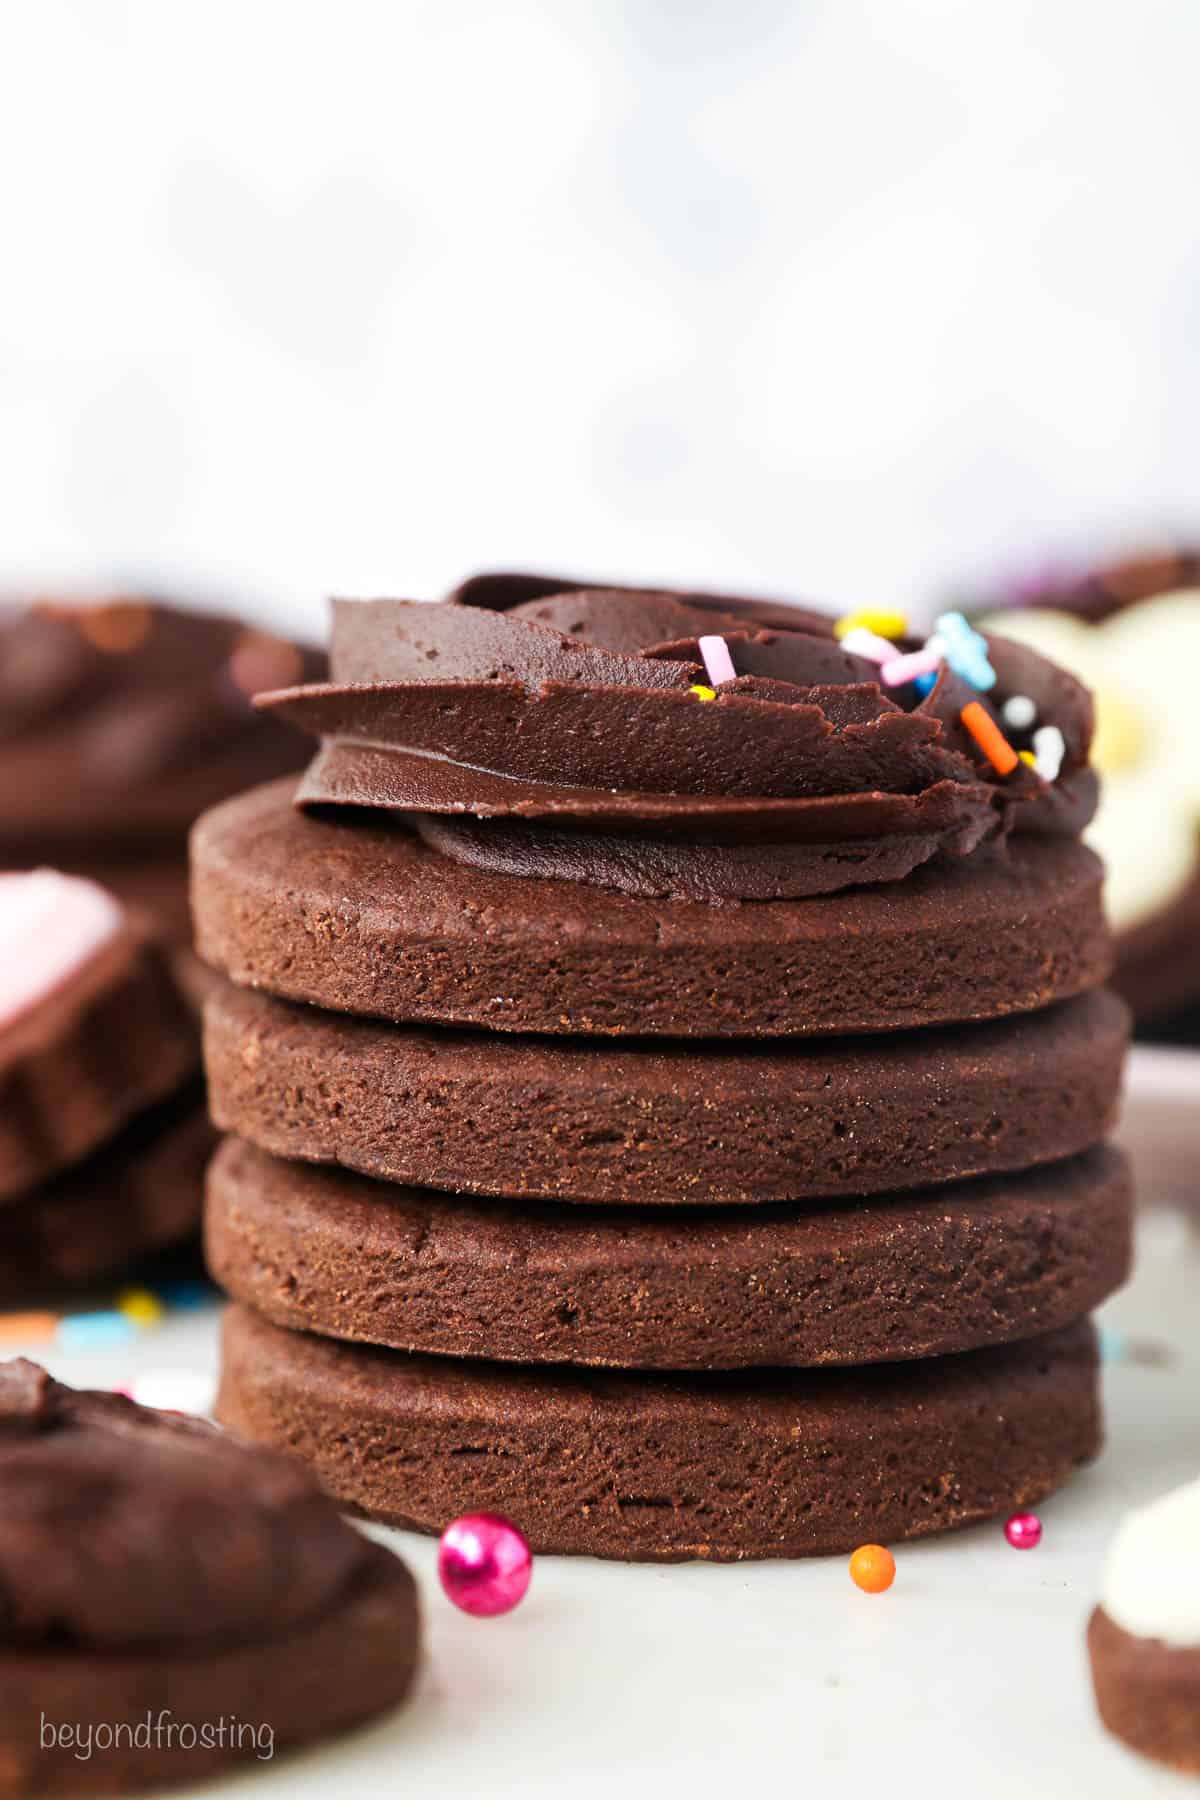 A stack of chocolate cutout sugar cookies with a swirl of chocolate frosting on the top cookie.